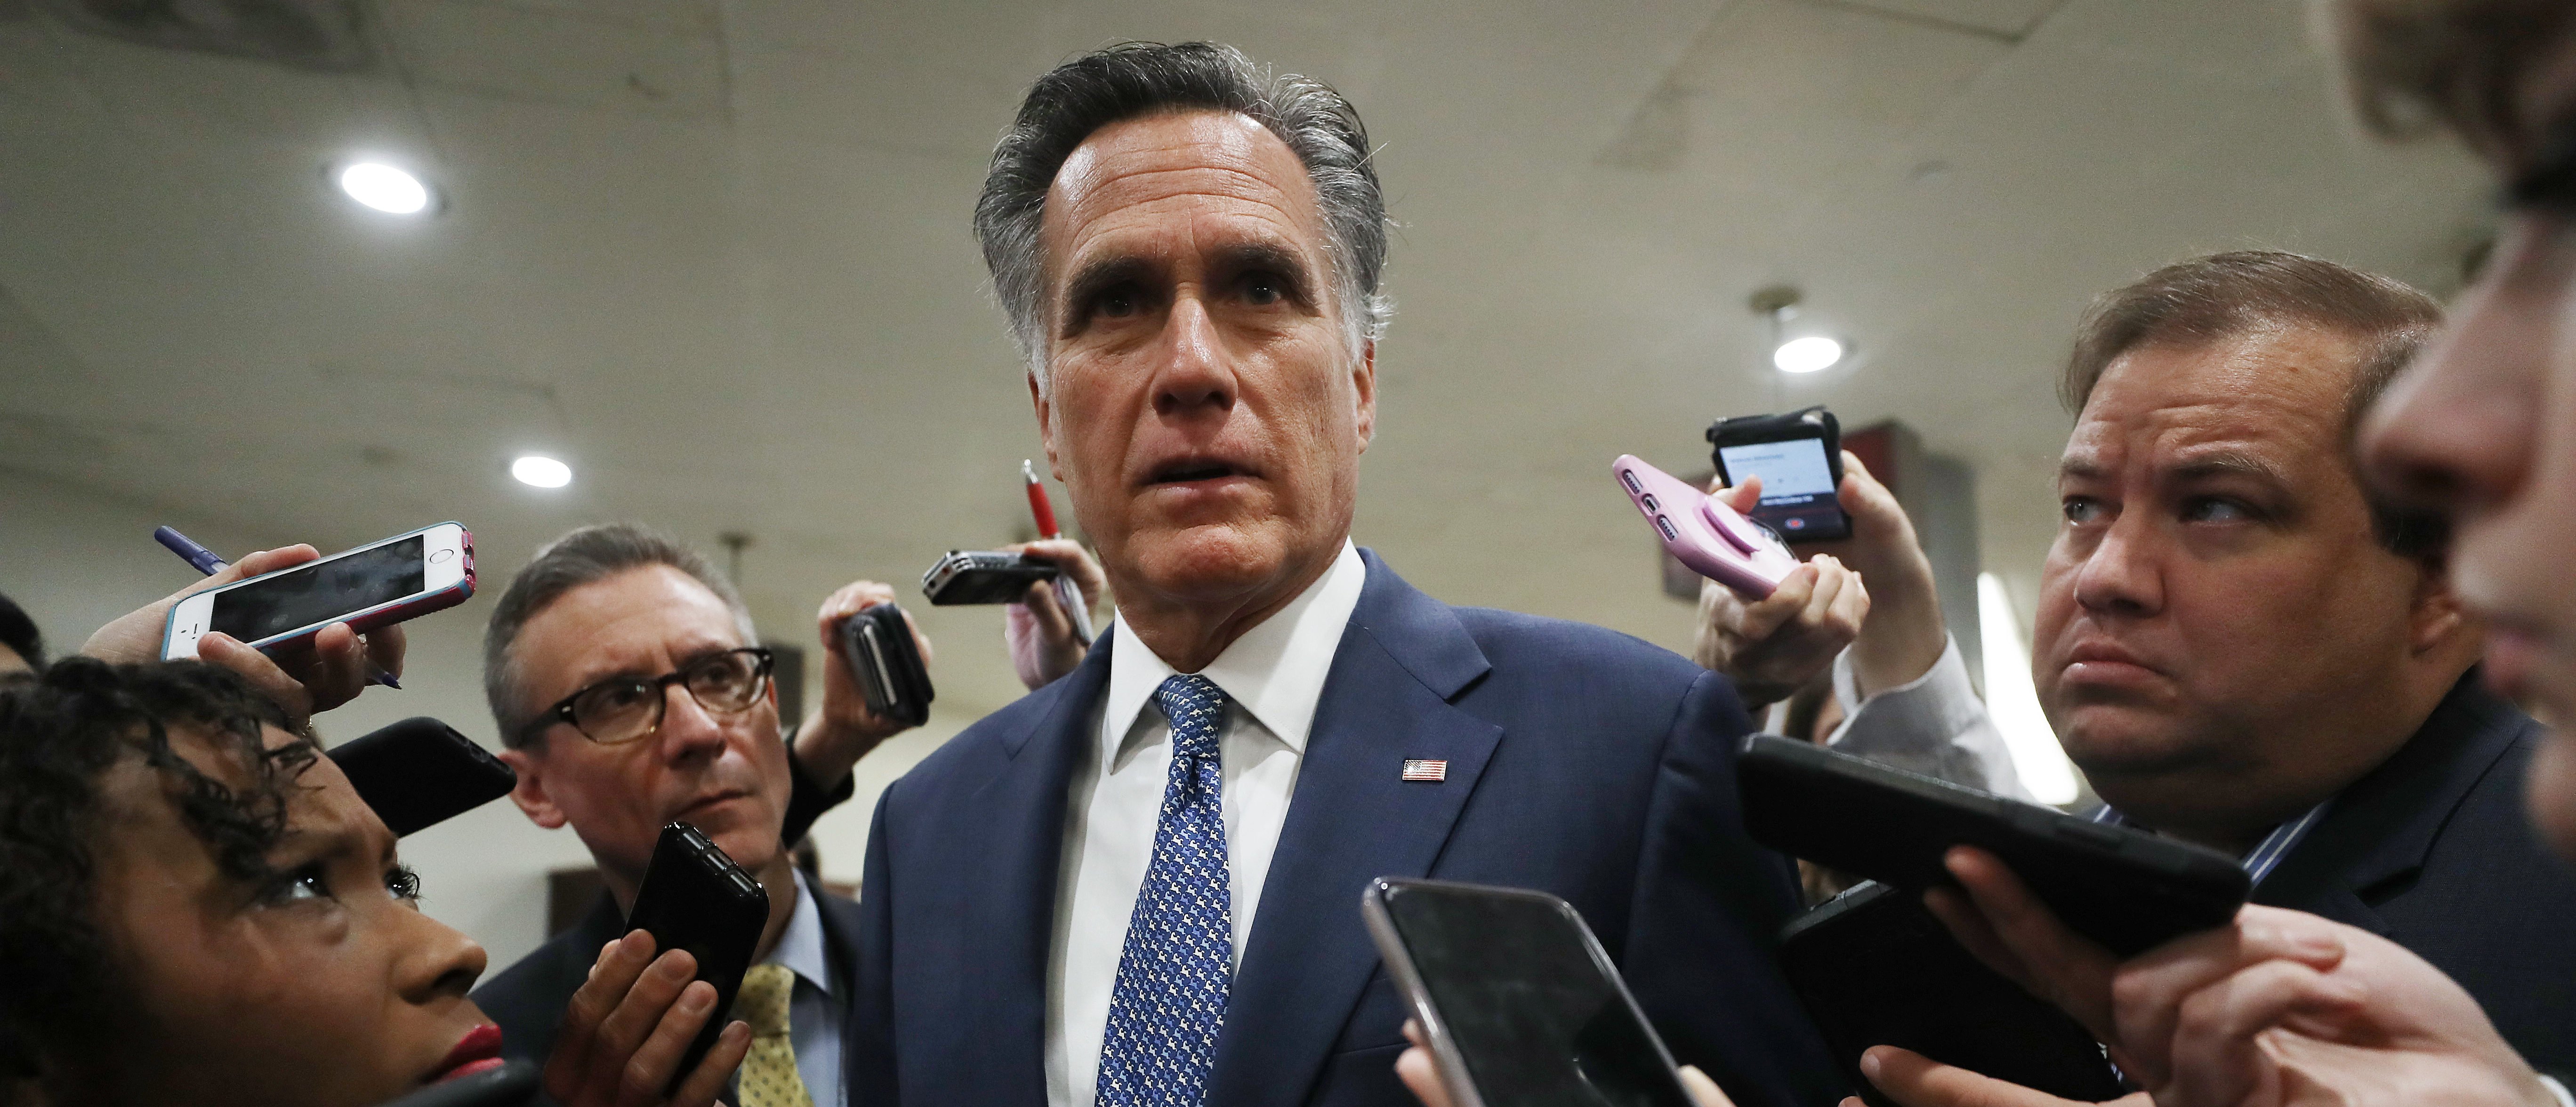 WASHINGTON, DC - JANUARY 29: Sen. Mitt Romney (R-UT) speaks to reporters upon arrival to the U.S. Capitol for the Senate impeachment trial on January 29, 2020 in Washington, DC. Wednesday begins the question-and-answer phase of the impeachment trial that will last up to 16 hours over the next two days. (Photo by Mario Tama/Getty Images)